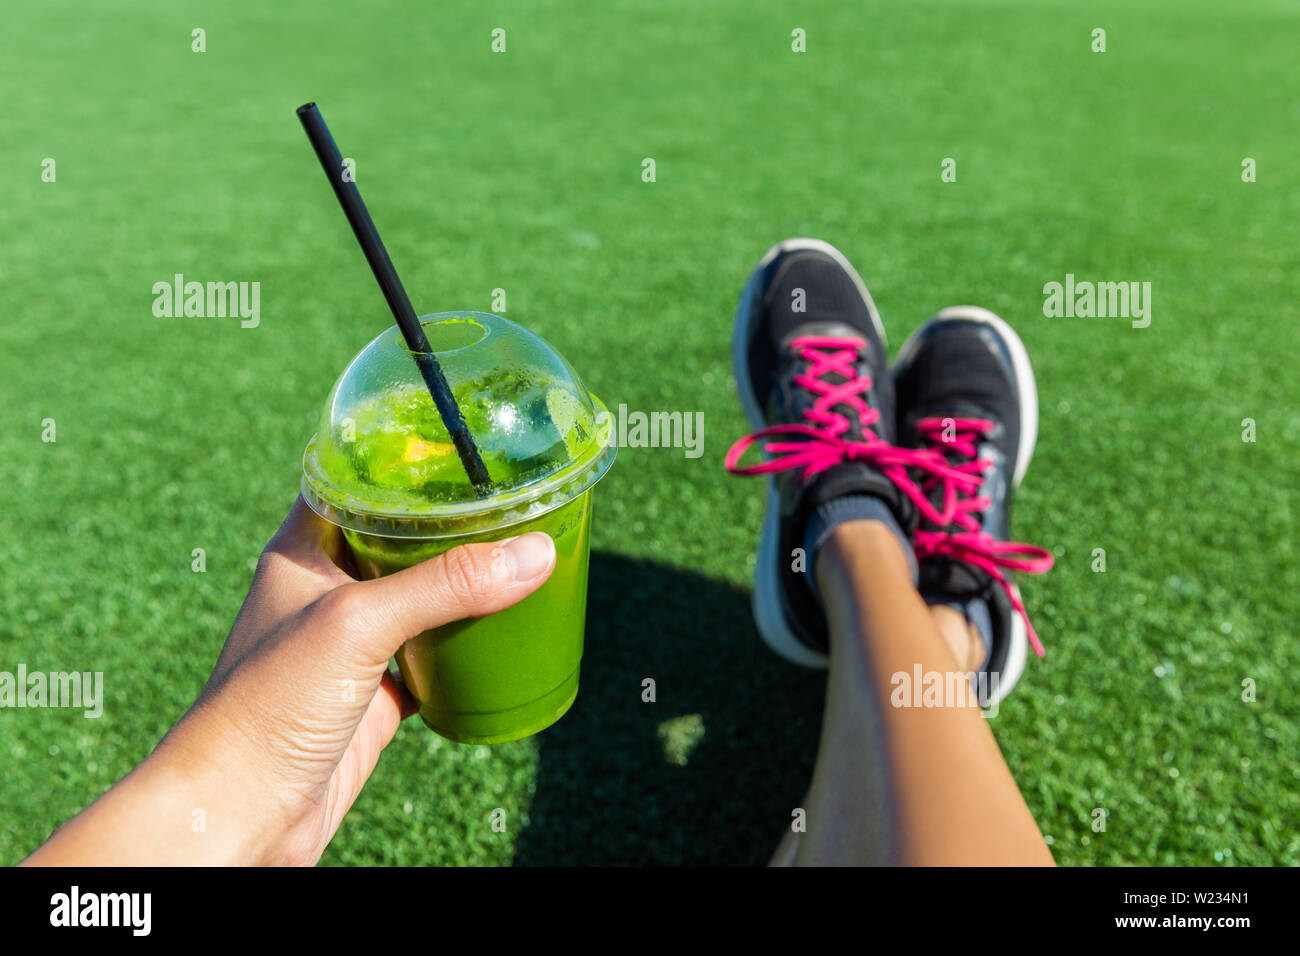 Green smoothie woman drinking plastic cup breakfast takeaway juice to go after morning run in summer park. Healthy lifestyle sporty person pov of hand holding drink with running shoes feet selfie. Stock Photo